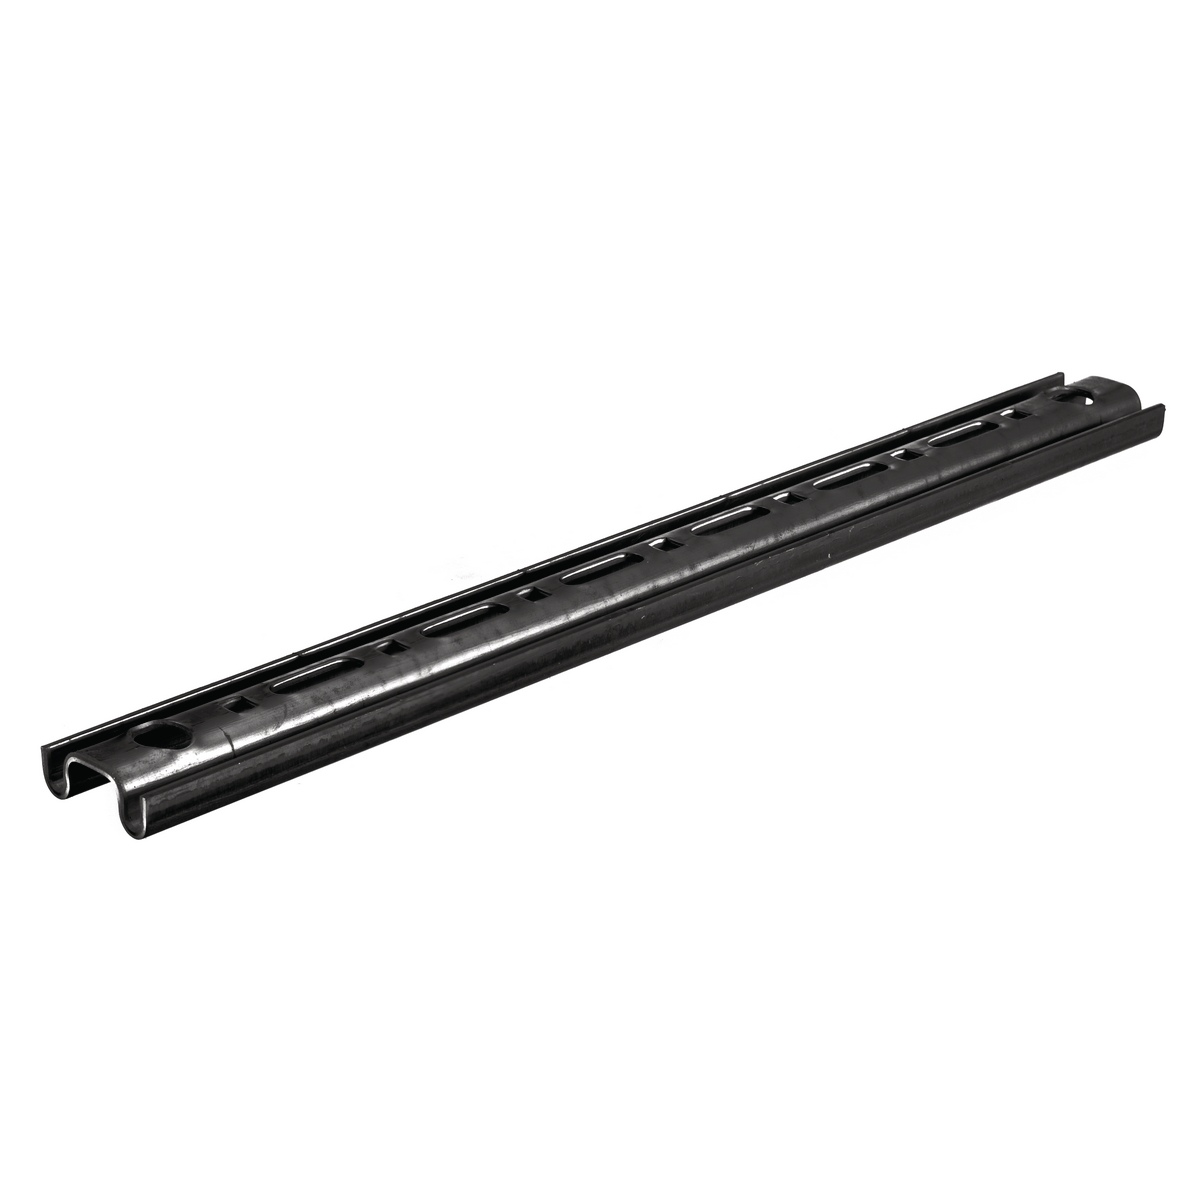 WB,ACCS,CEILINGSUPPORT,12"TRAY,BLACK